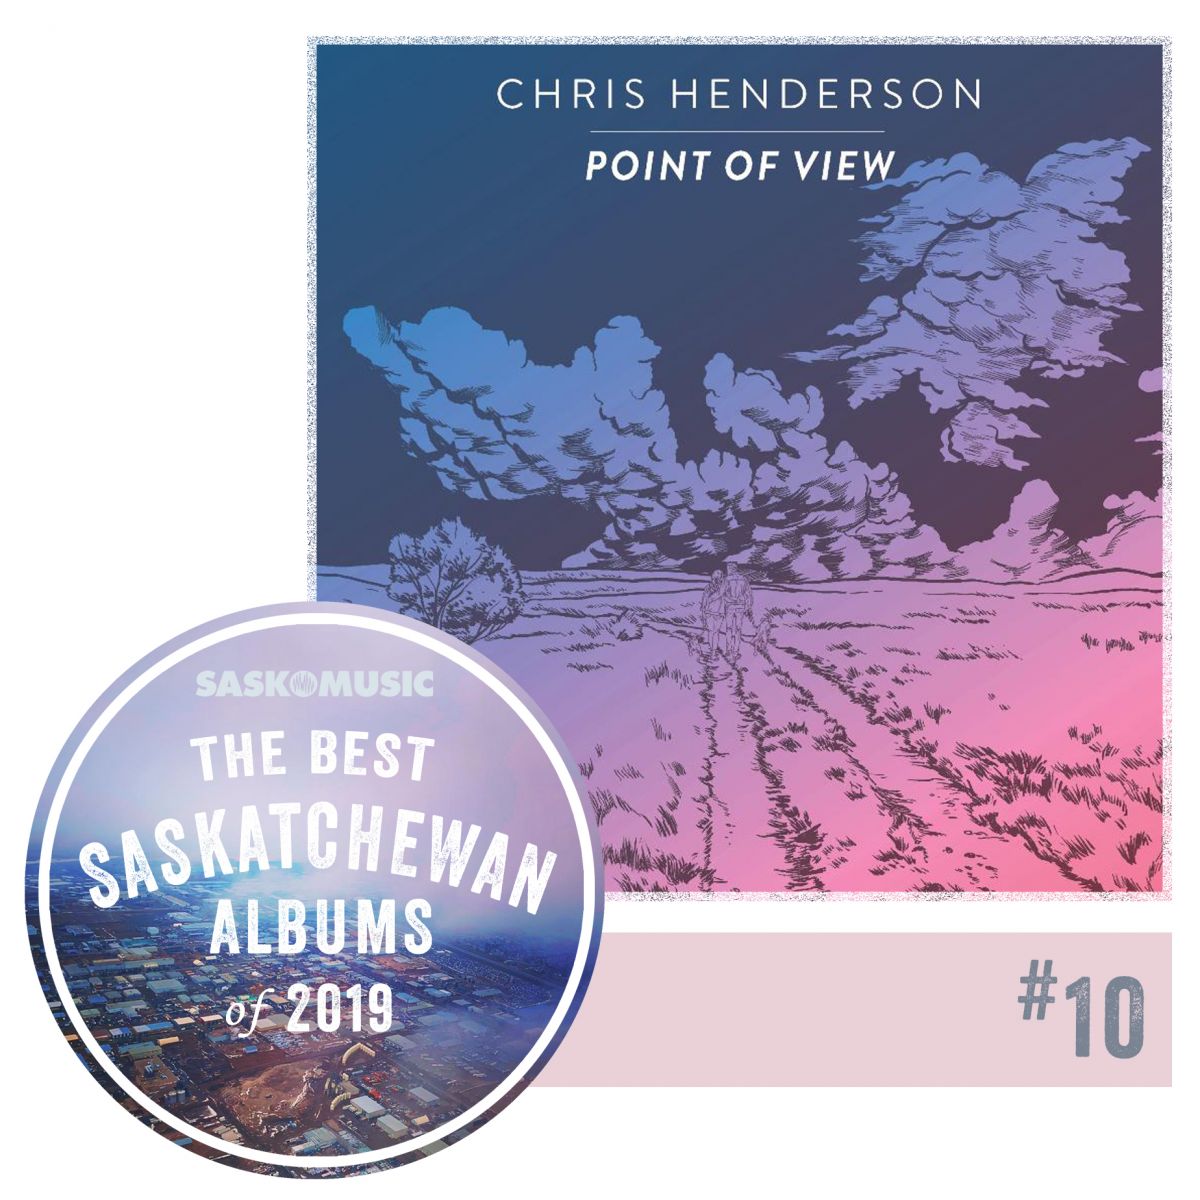 Chris Henderson - Point of View